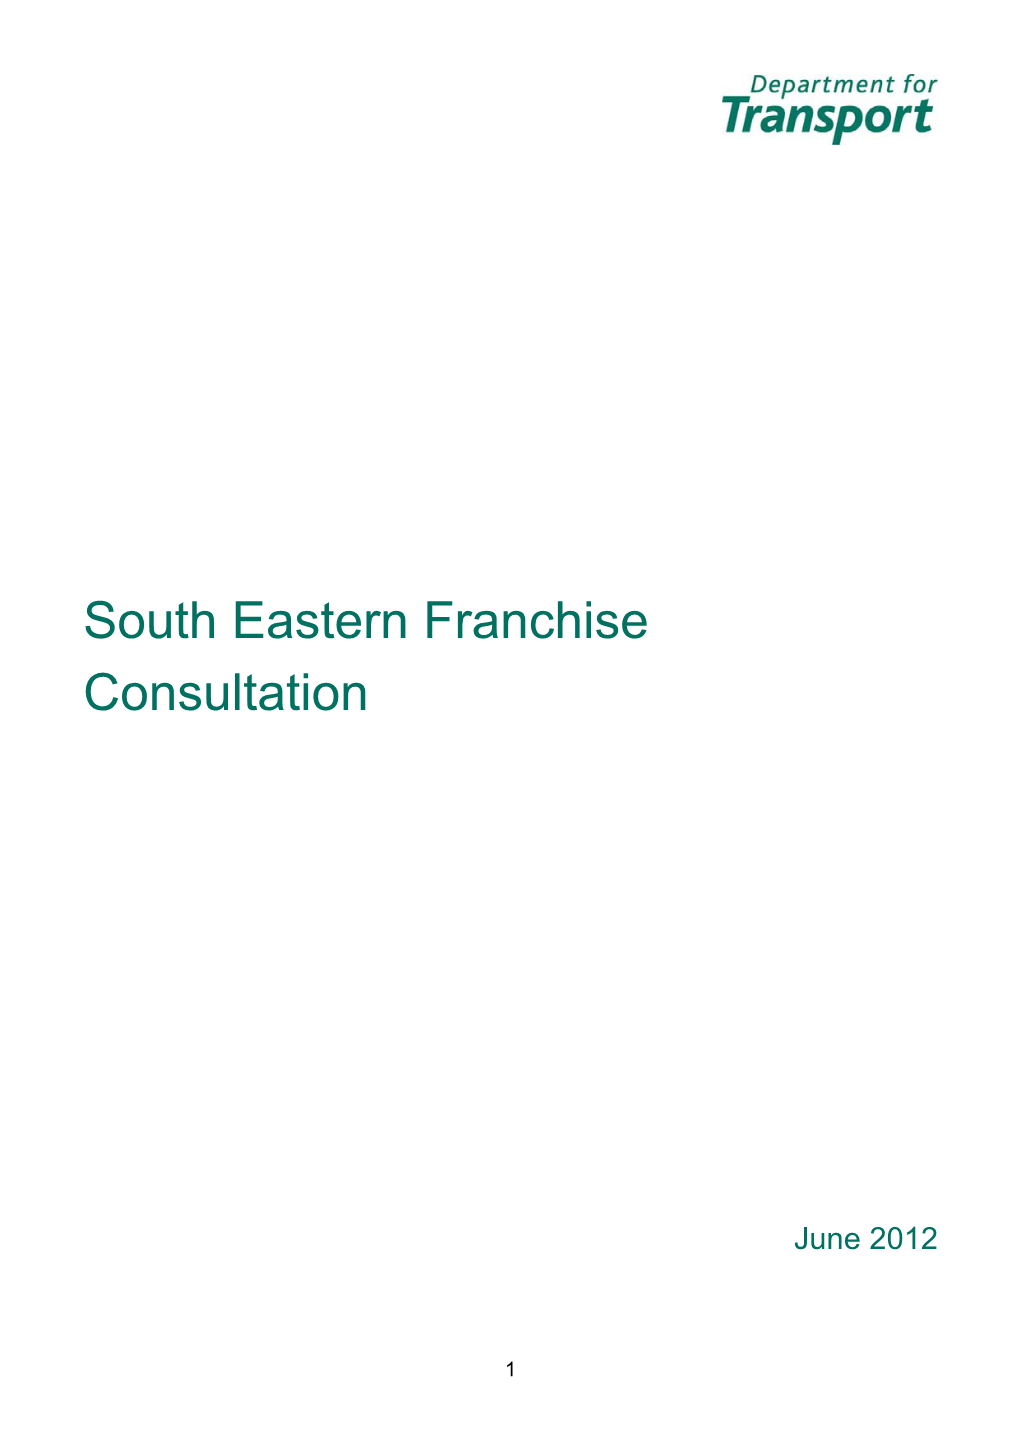 South Eastern Franchise Consultation